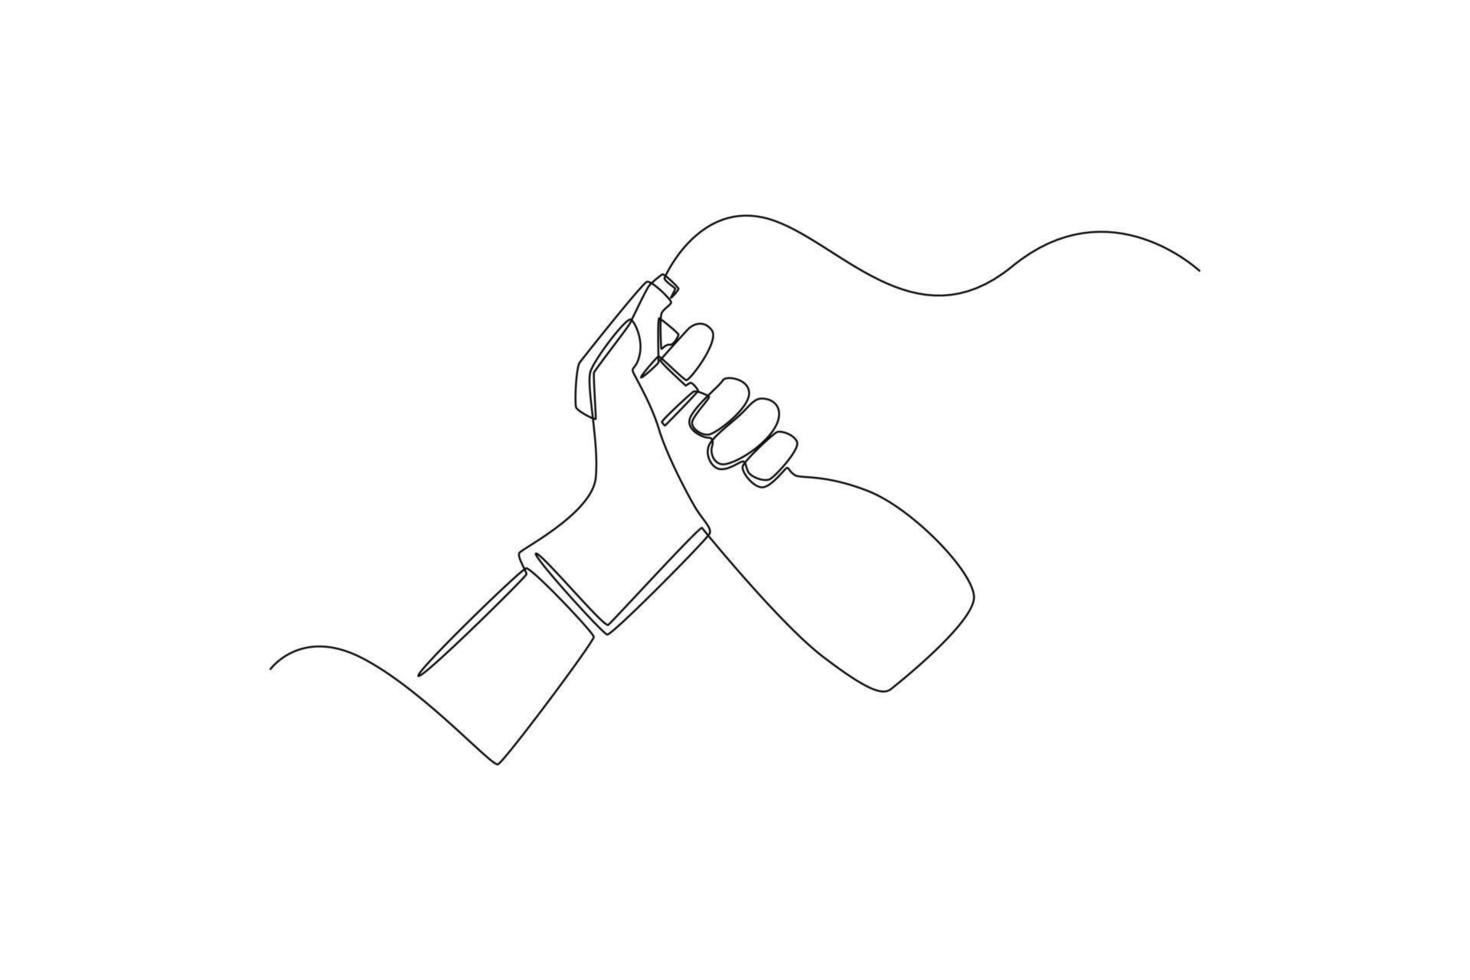 Continuous one line drawing Man in gloves holds bottle of antiseptic spray. Office cleaning services concept. Single line draw design vector graphic illustration.